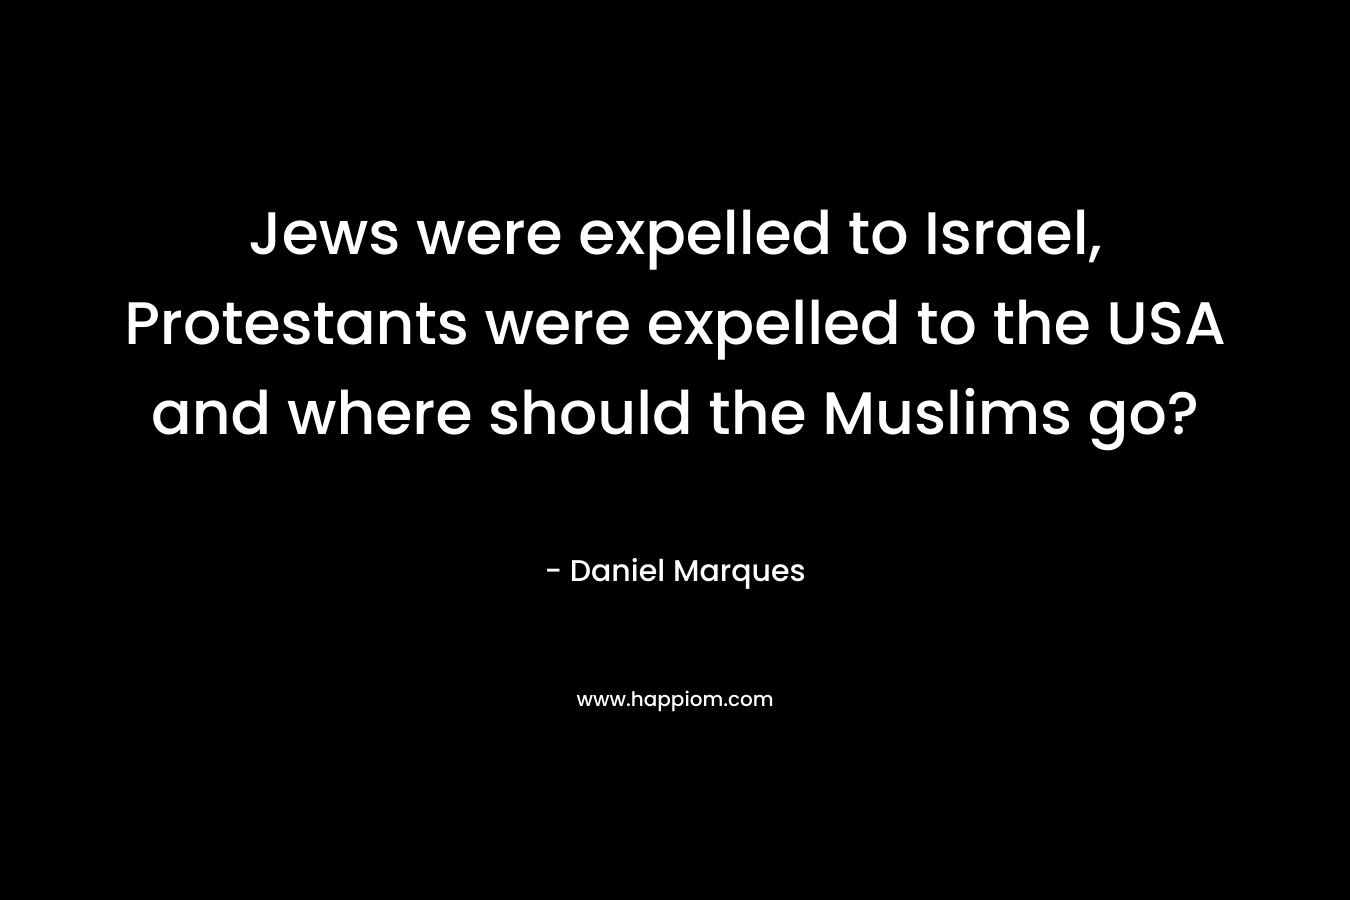 Jews were expelled to Israel, Protestants were expelled to the USA and where should the Muslims go? – Daniel Marques